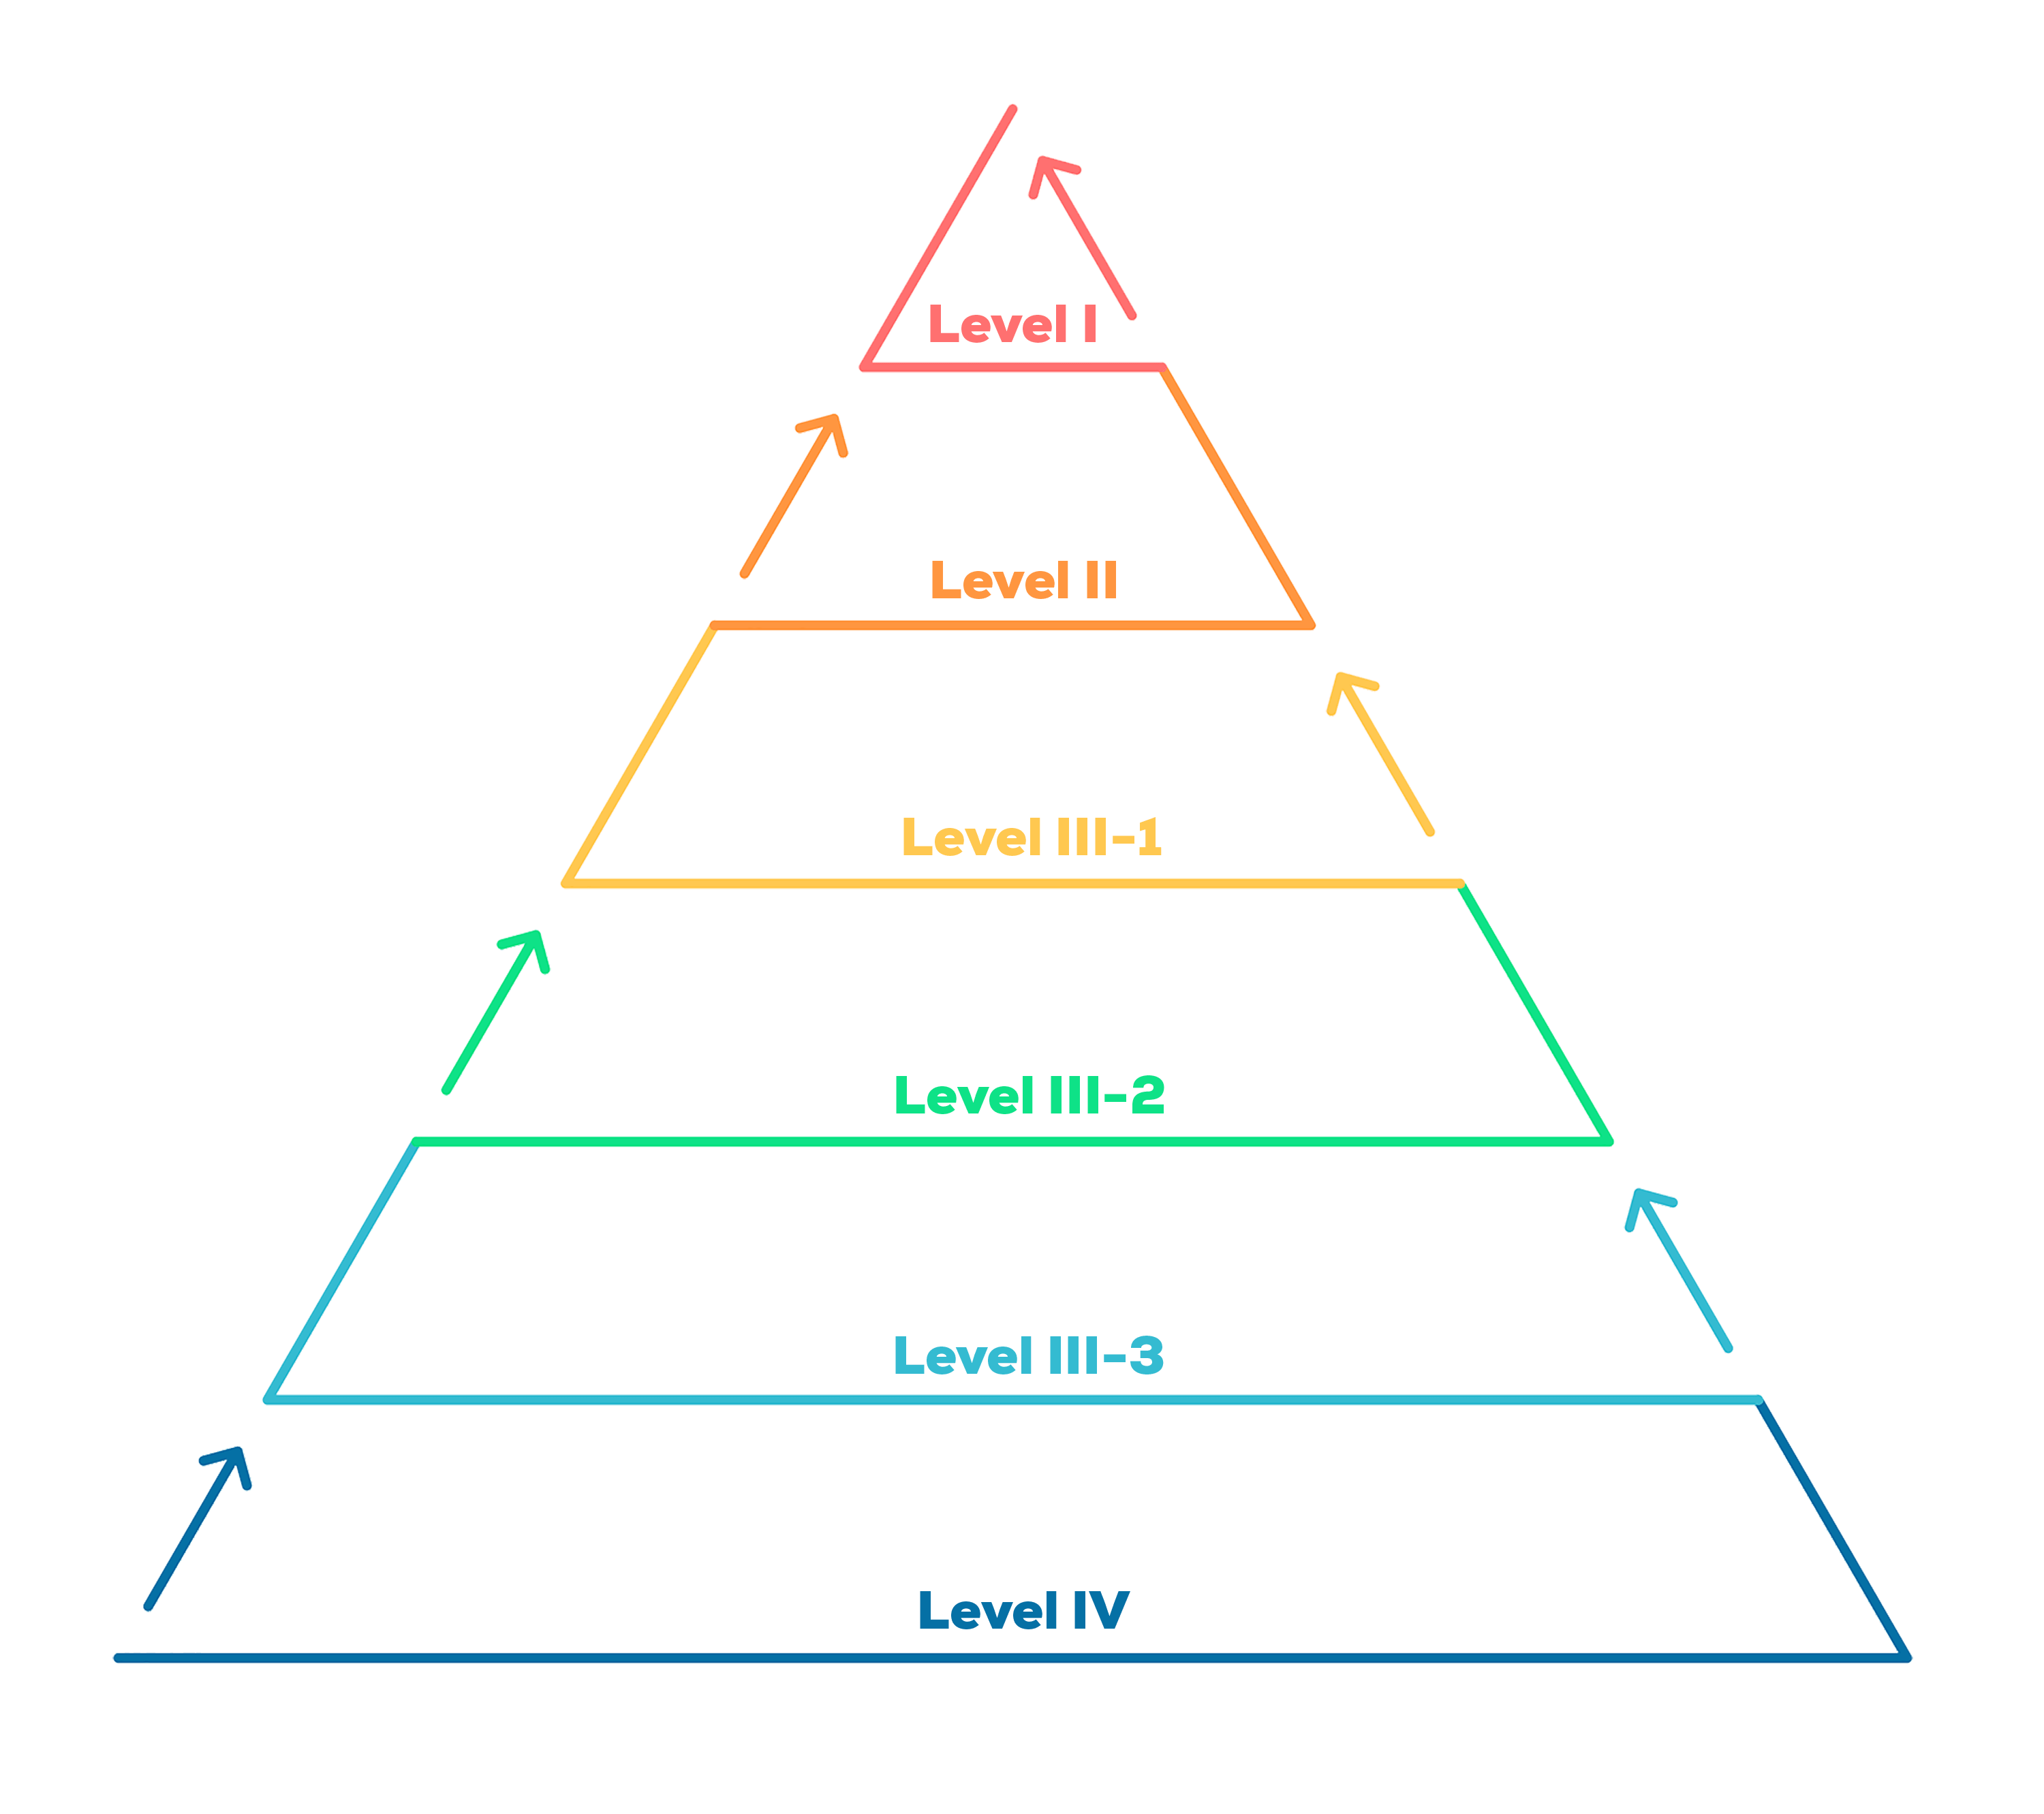 A diagram of a pyramid depicting levels of evidence